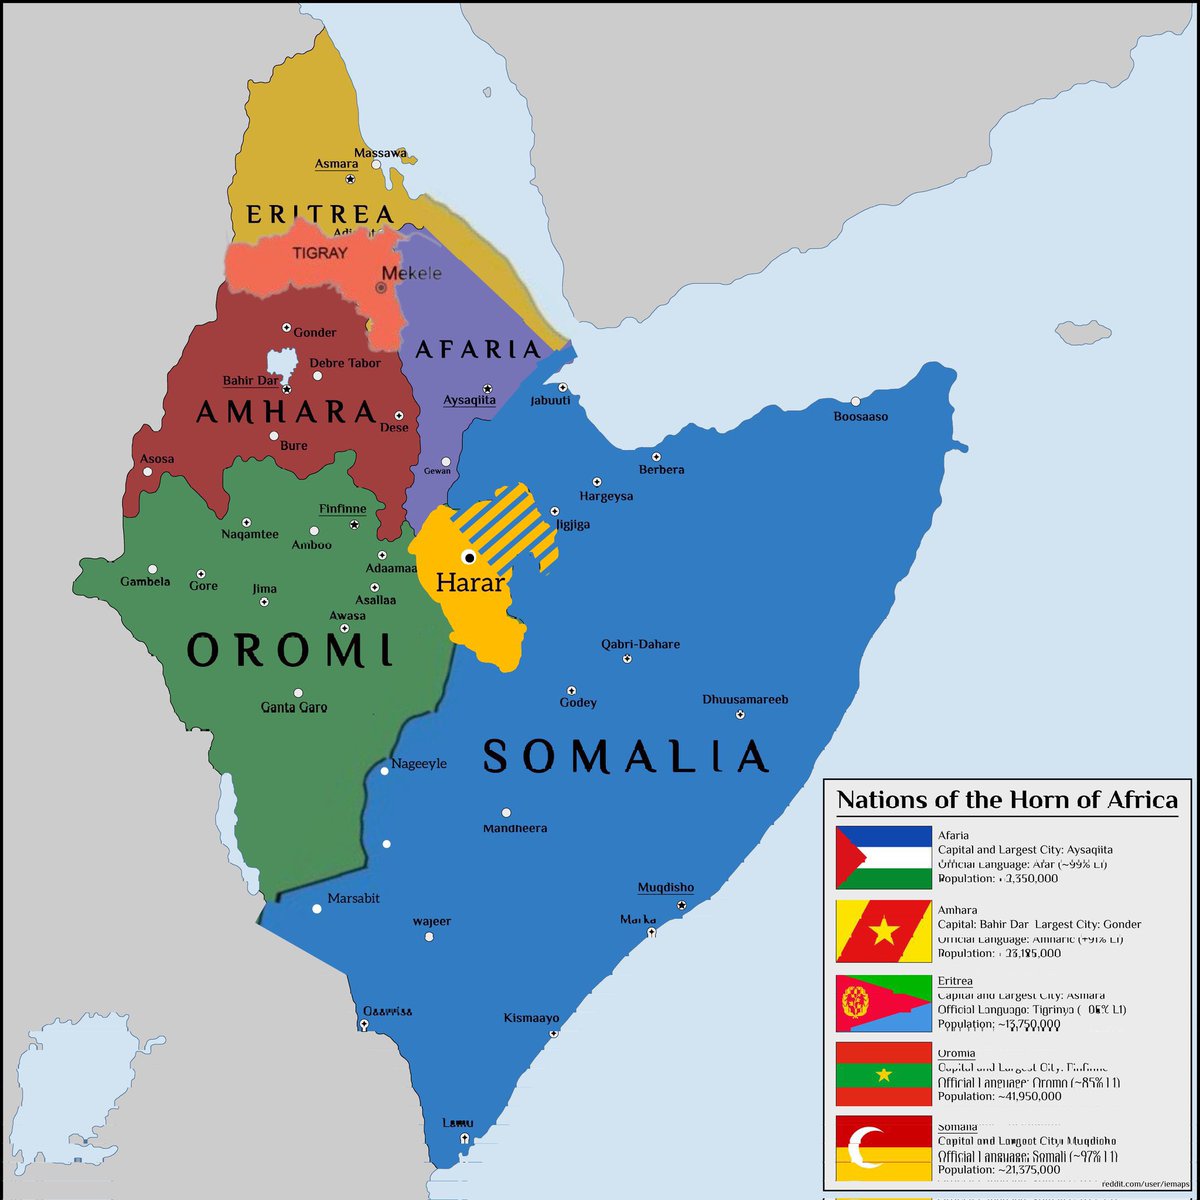 Normally, disintegration happens when the devolution of power fails to persevere the unity of a country but in the case of Ethiopia, it is different. #HornOfAfrica #NewMap 

Ethiopia’s disintegration isn’t new and shouldn’t be a surprise. Ever since Haile Selassie's reign 1940s,